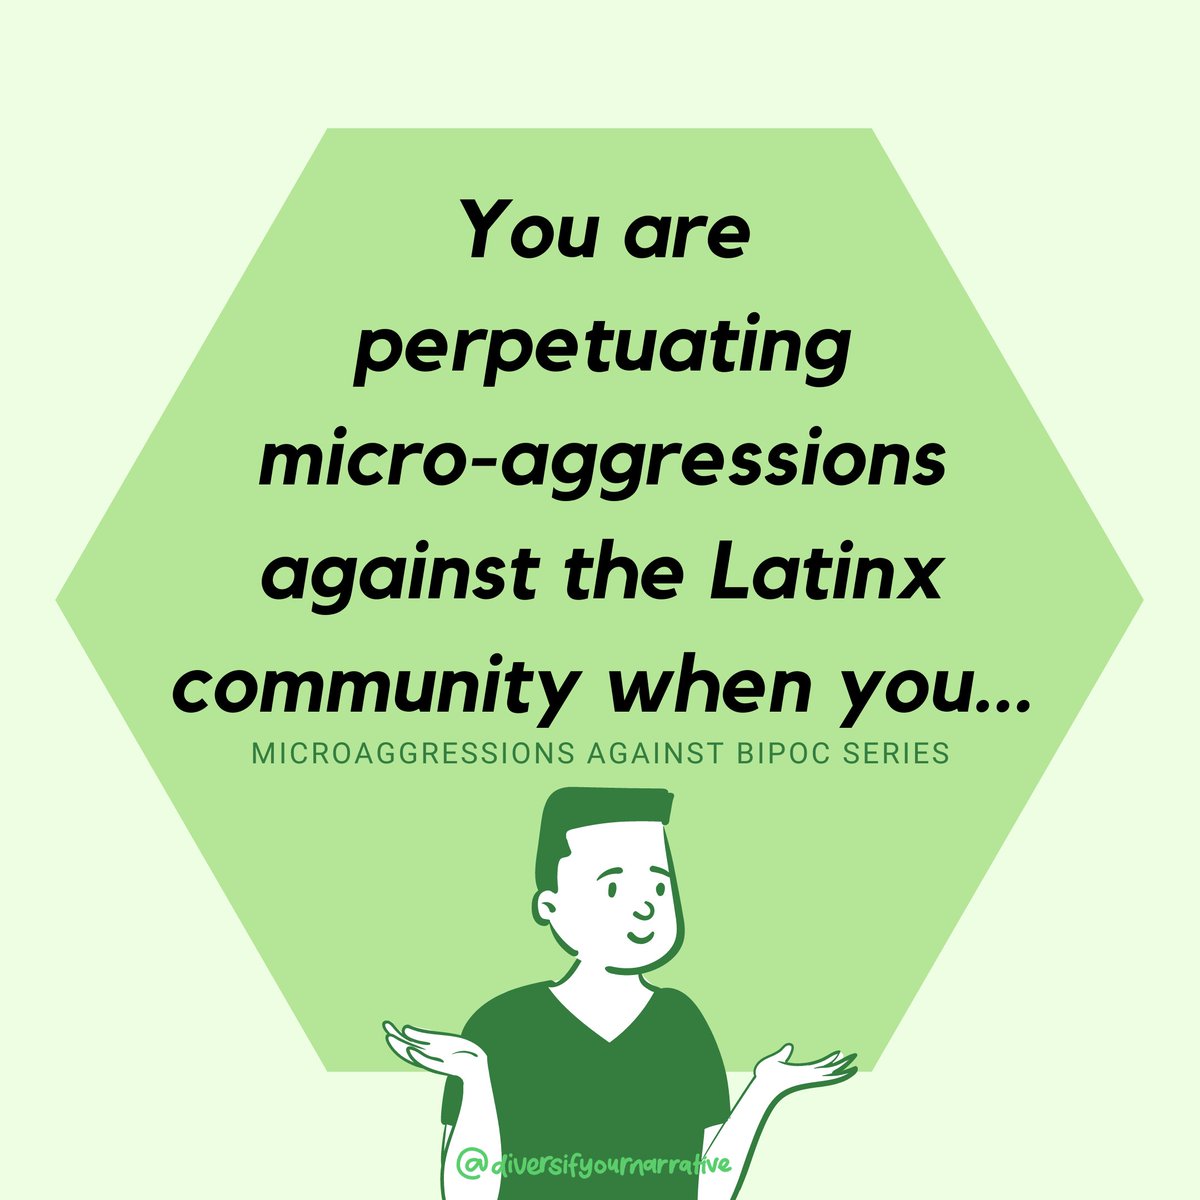 THREAD: Common Microaggressions Against Latinx People (Microaggressions Against BIPOC Series)! Whether intentional or unintentional, Microaggressions normalize racism within our communities: THIS NEEDS TO STOP.